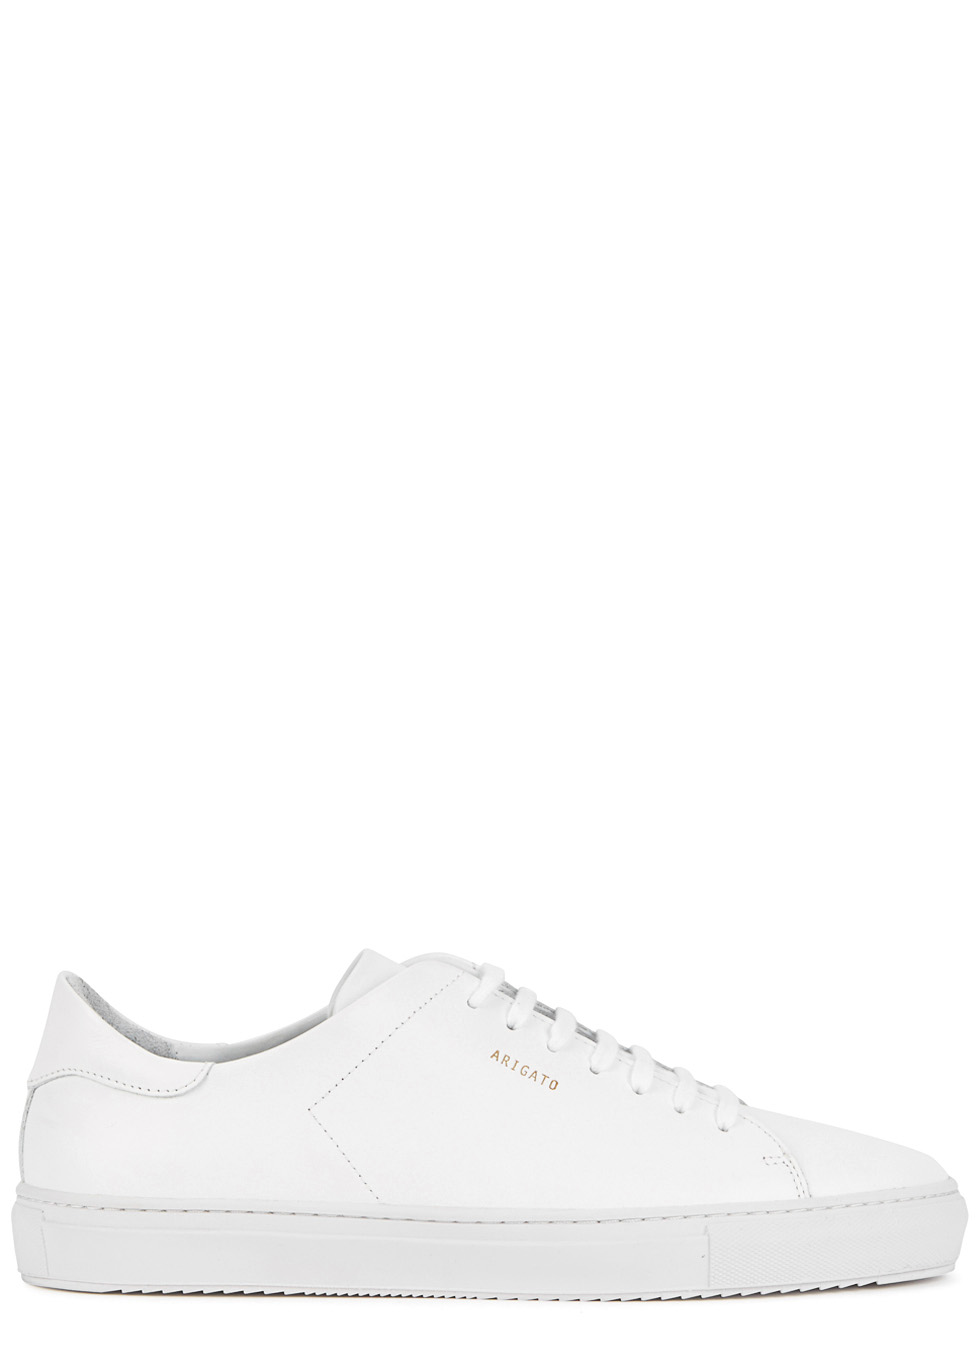 clean 9 sneaker white leather